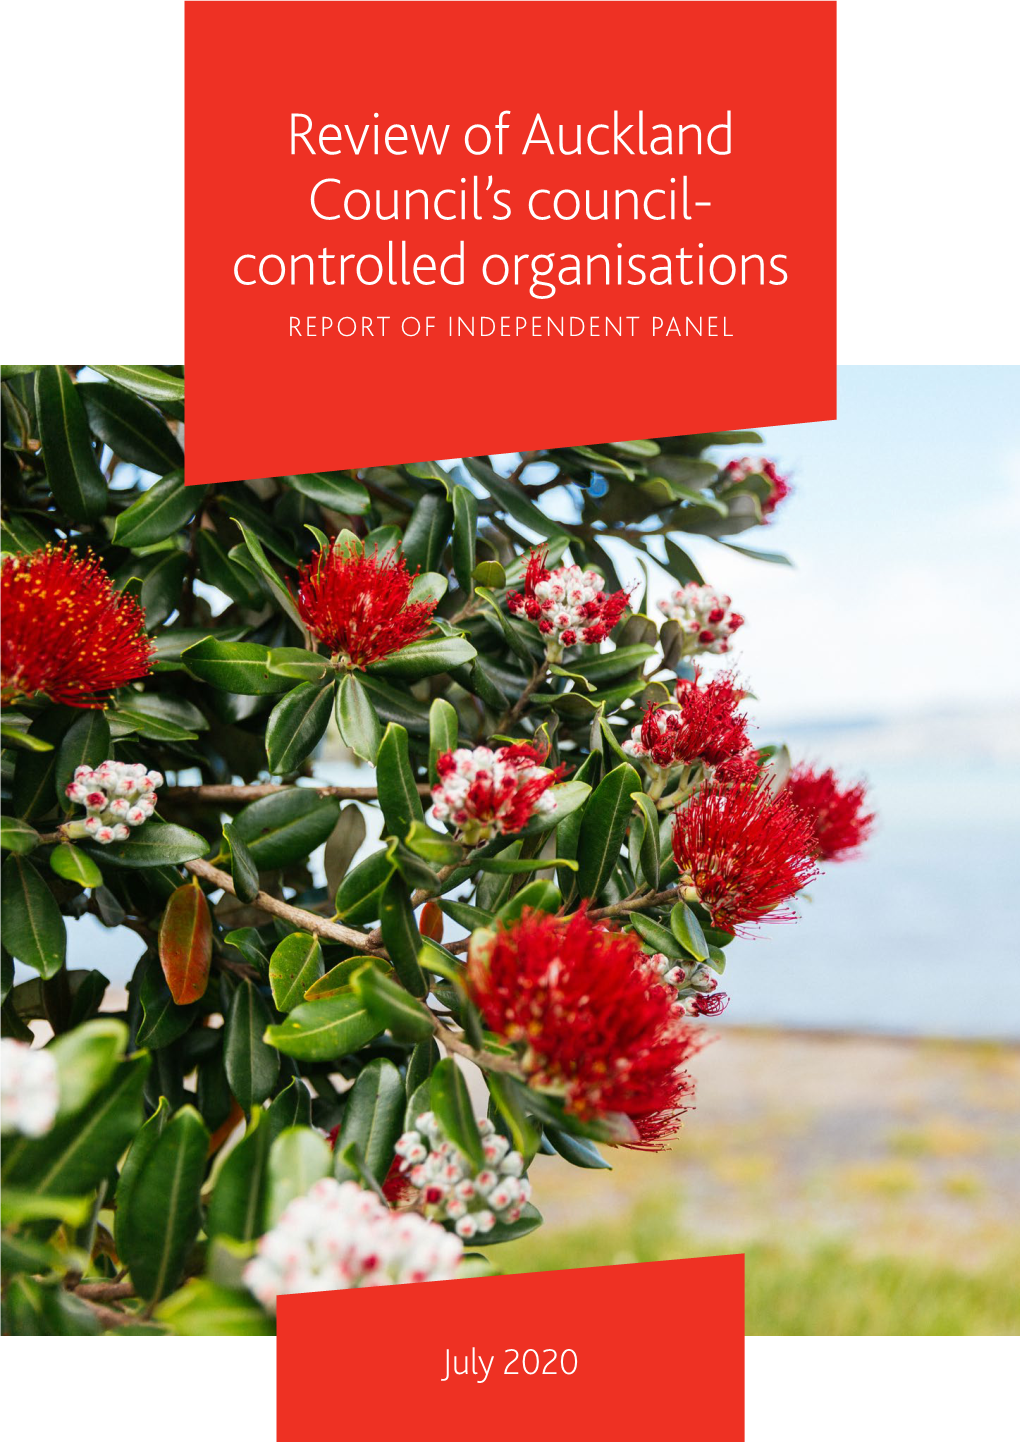 Review of Auckland Council's Council Controlled Organisations